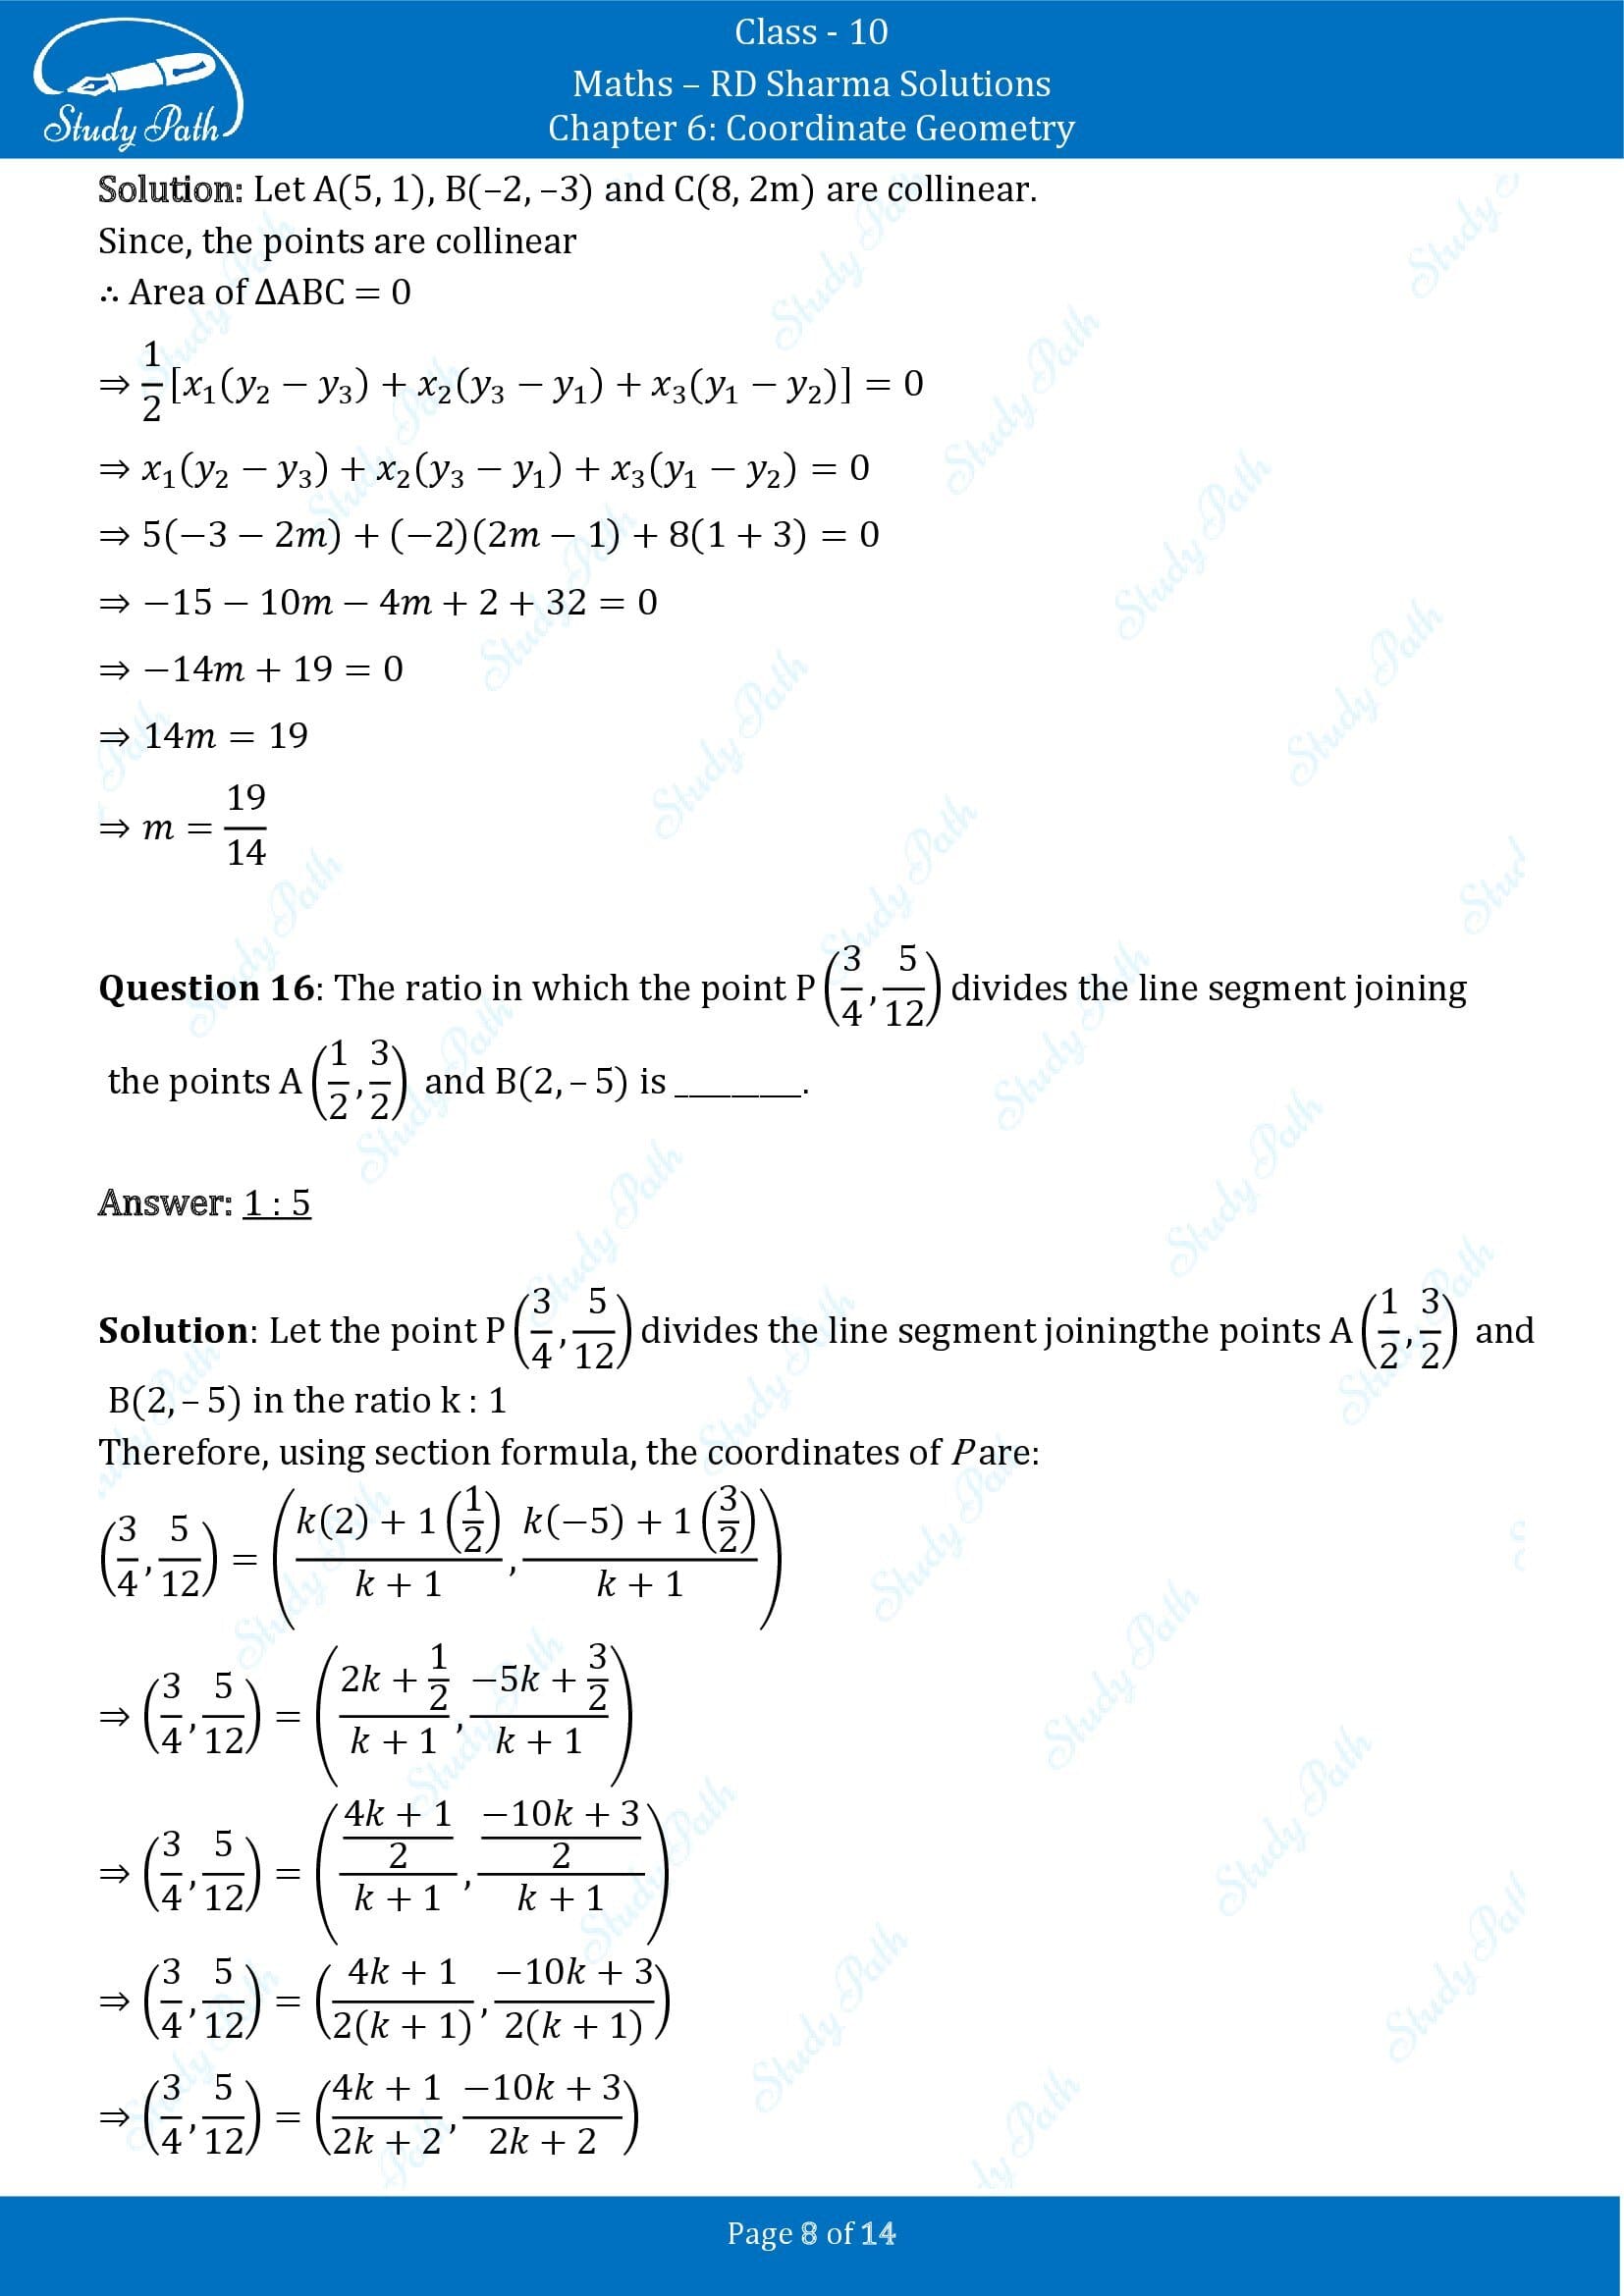 RD Sharma Solutions Class 10 Chapter 6 Coordinate Geometry Fill in the Blank Type Questions FBQs 00008